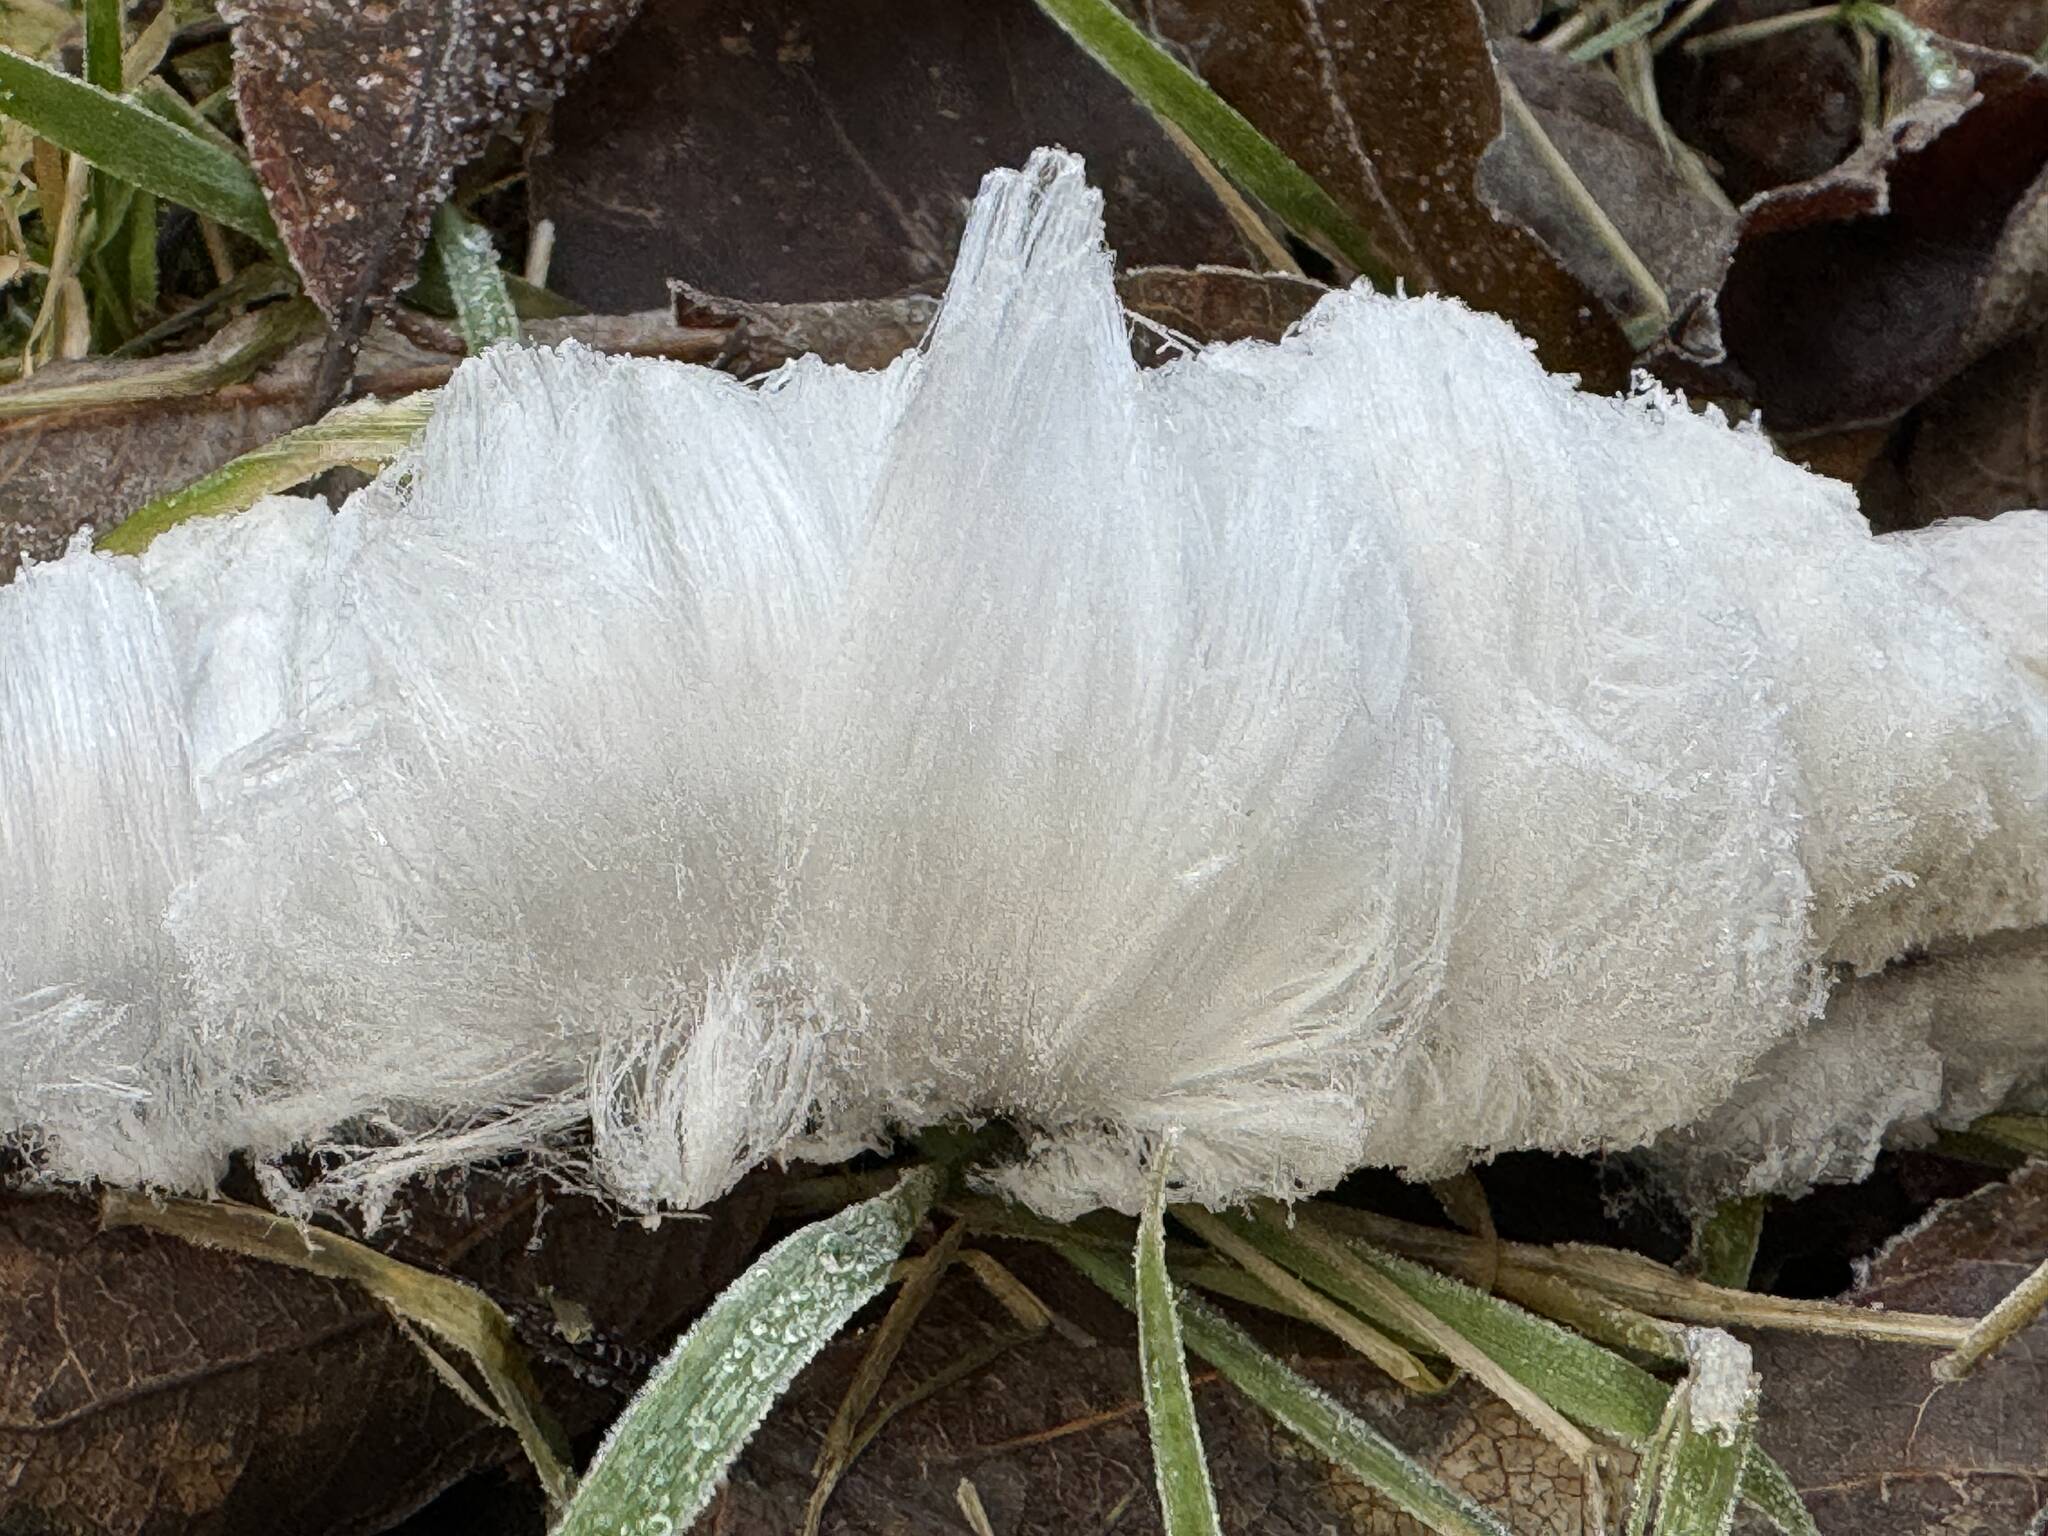 Hair ice, caused by a fungus on dead wood as it “breathes,” along the Mendenhall Wetlands Trail on Dec. 2. (Photo by Deana Barajas)